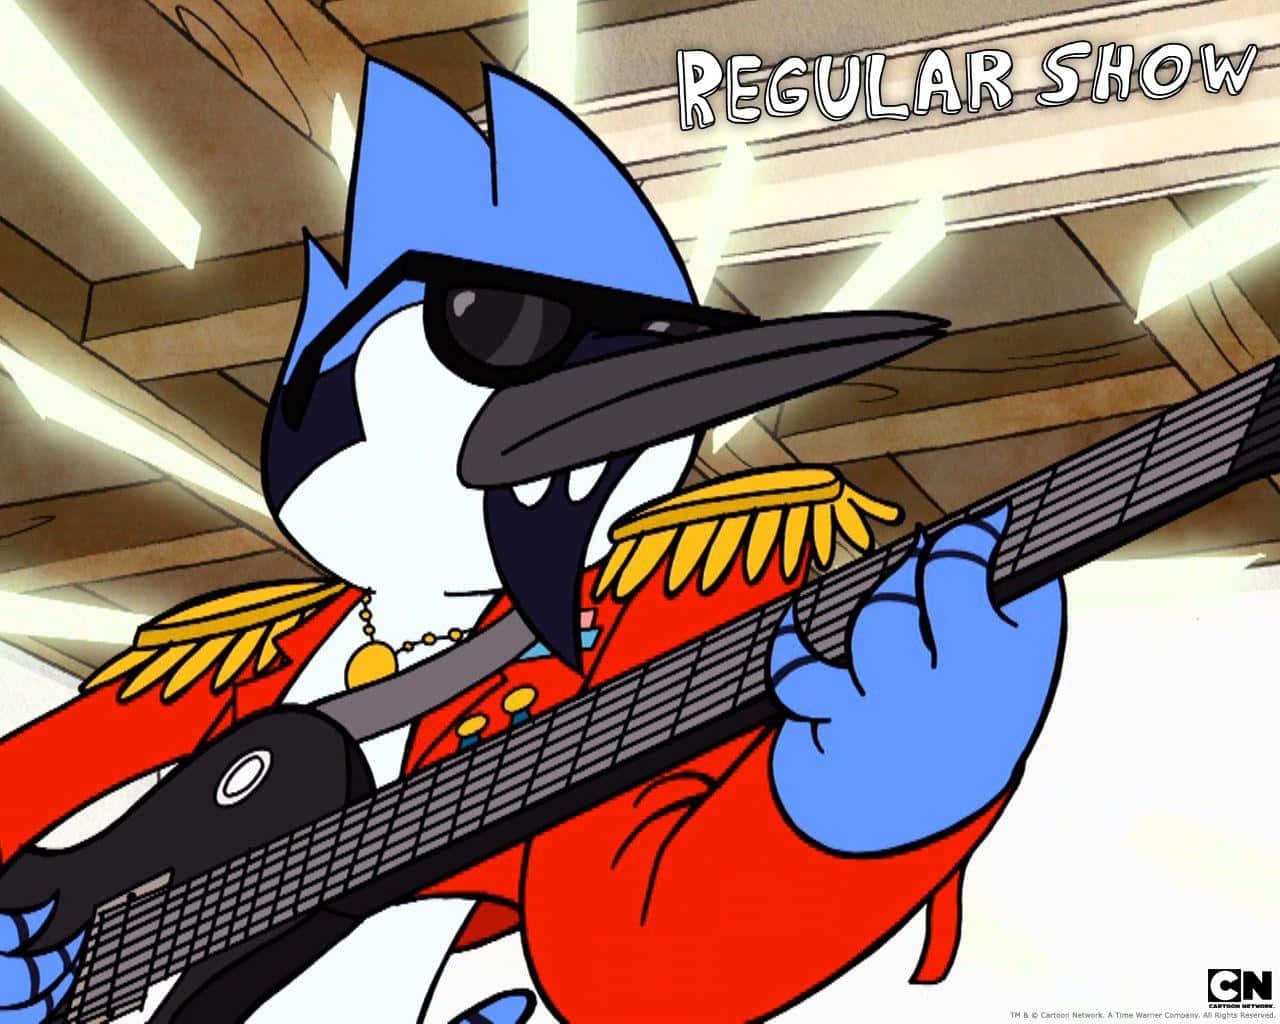 Mordecai and Rigby's wacky adventures in Regular Show